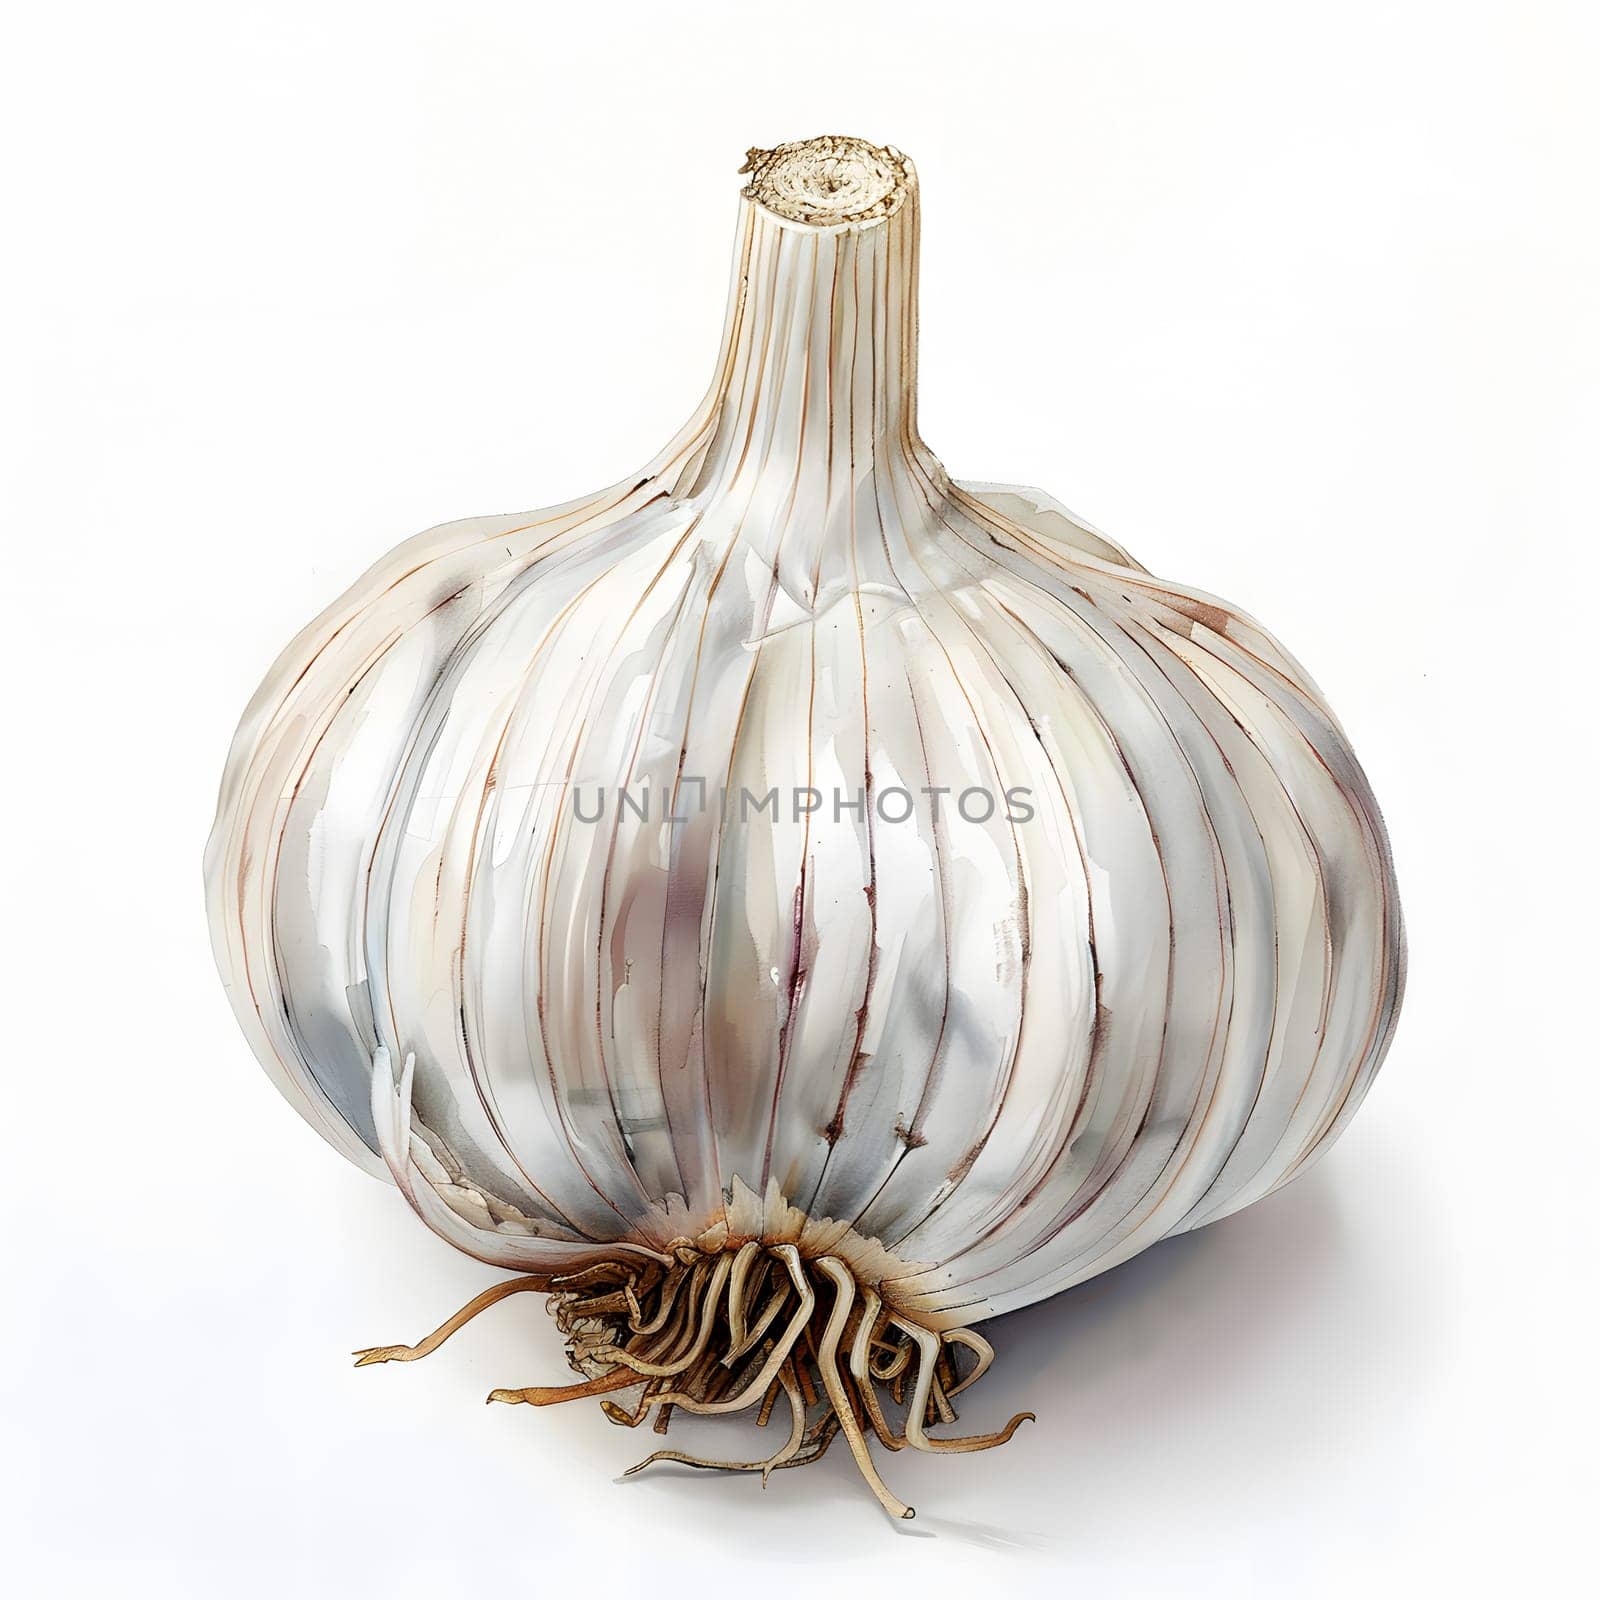 Close up of garlic bulb, a plantbased food ingredient, on white background by Nadtochiy